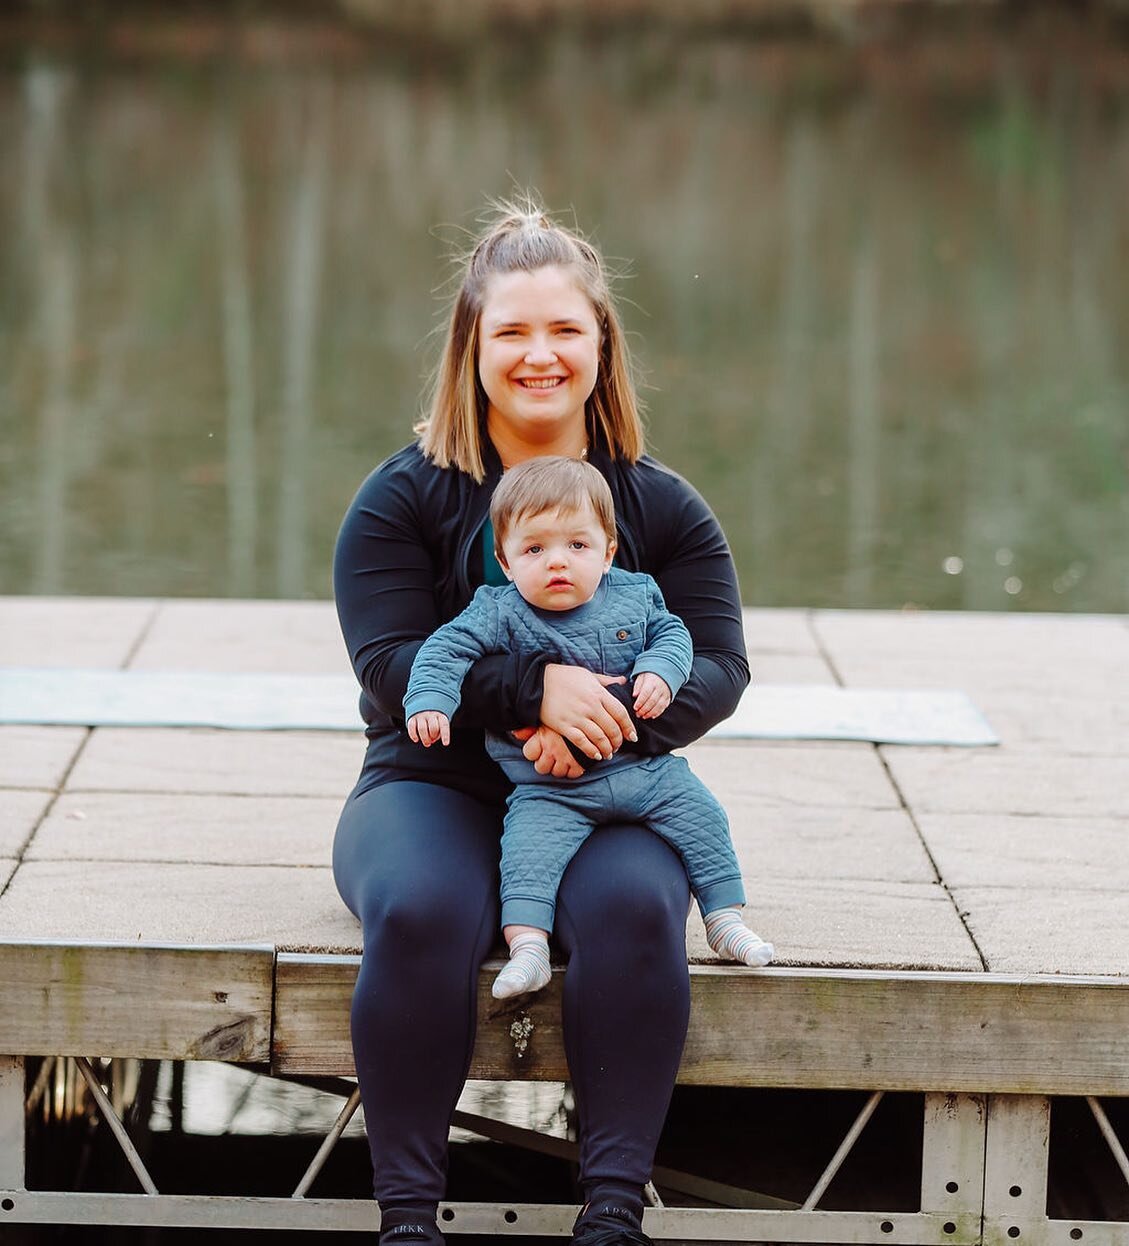 Some things I learned after my son had anaphylaxis.

The experience of my 9 month old having anaphylaxis from coconut yogurt has been traumatic, but also enlightening. I want to share some things I learned, so more parents are better prepared if god 